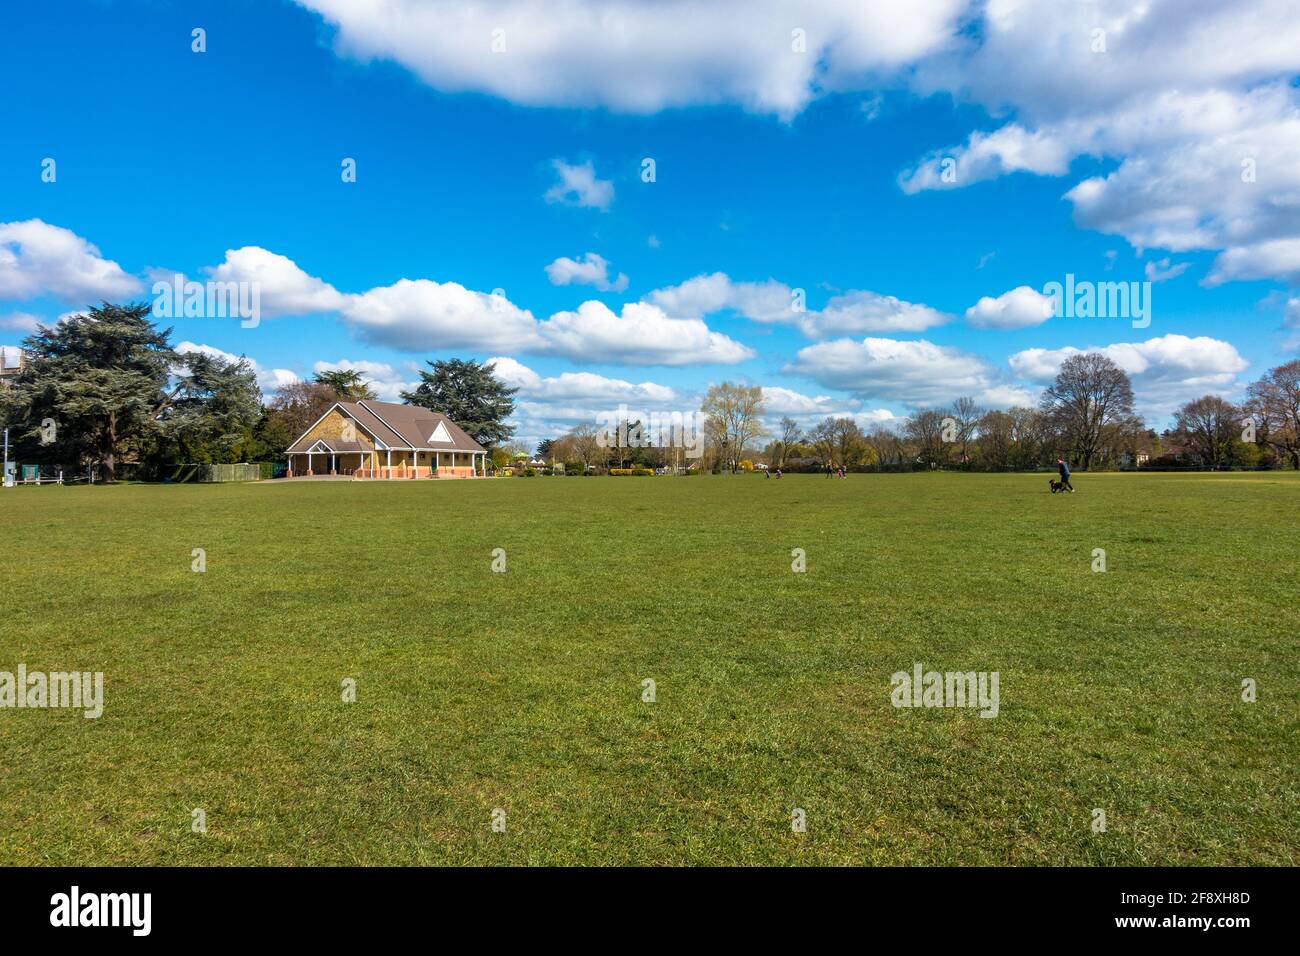 A view of Sol Joel Park, in Earley, Reading, UK. An open green, public space on a day with. blue sky and clouds. Stock Photo